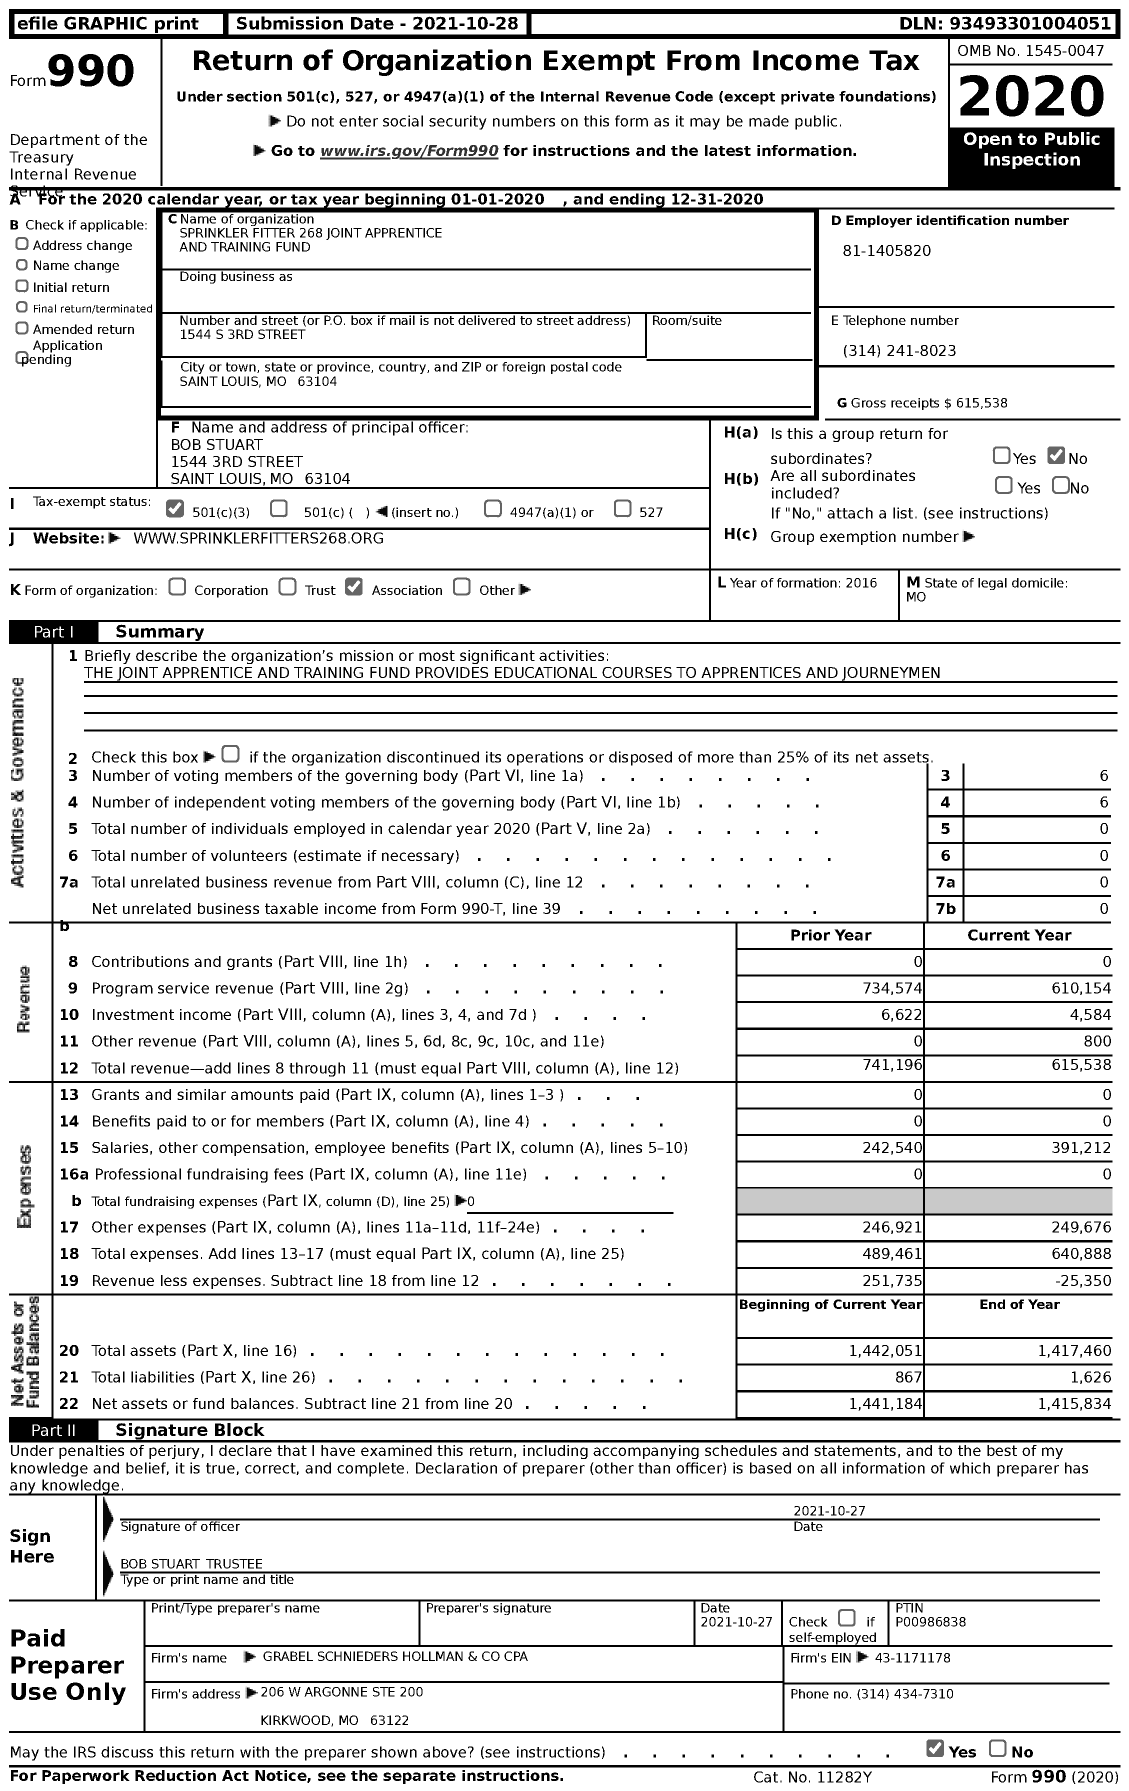 Image of first page of 2020 Form 990 for Sprinkler Fitter 268 Joint Apprentice and Training Fund